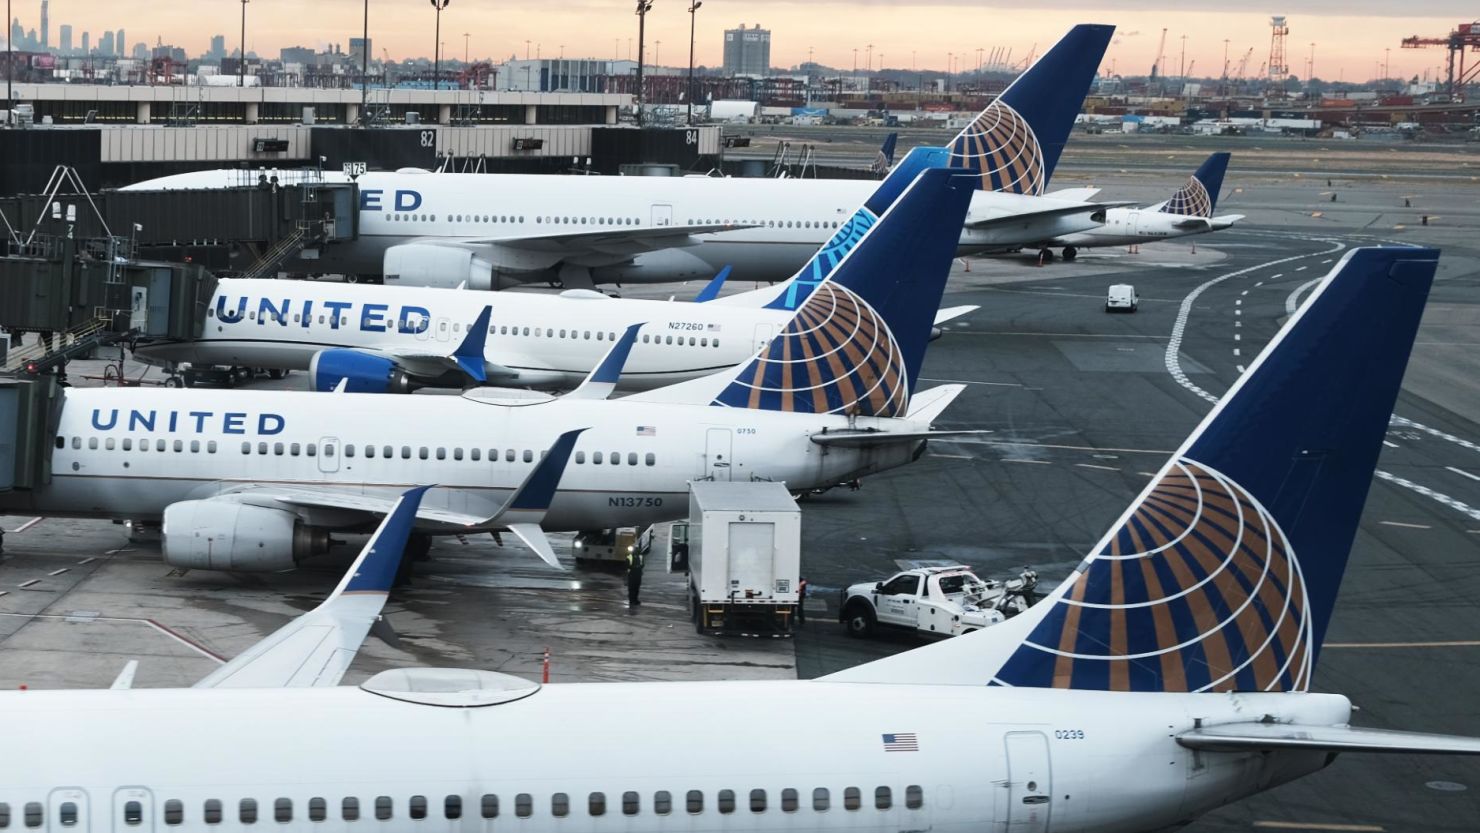 United Airlines avoiding Russian airspace, canceling flights | CNN